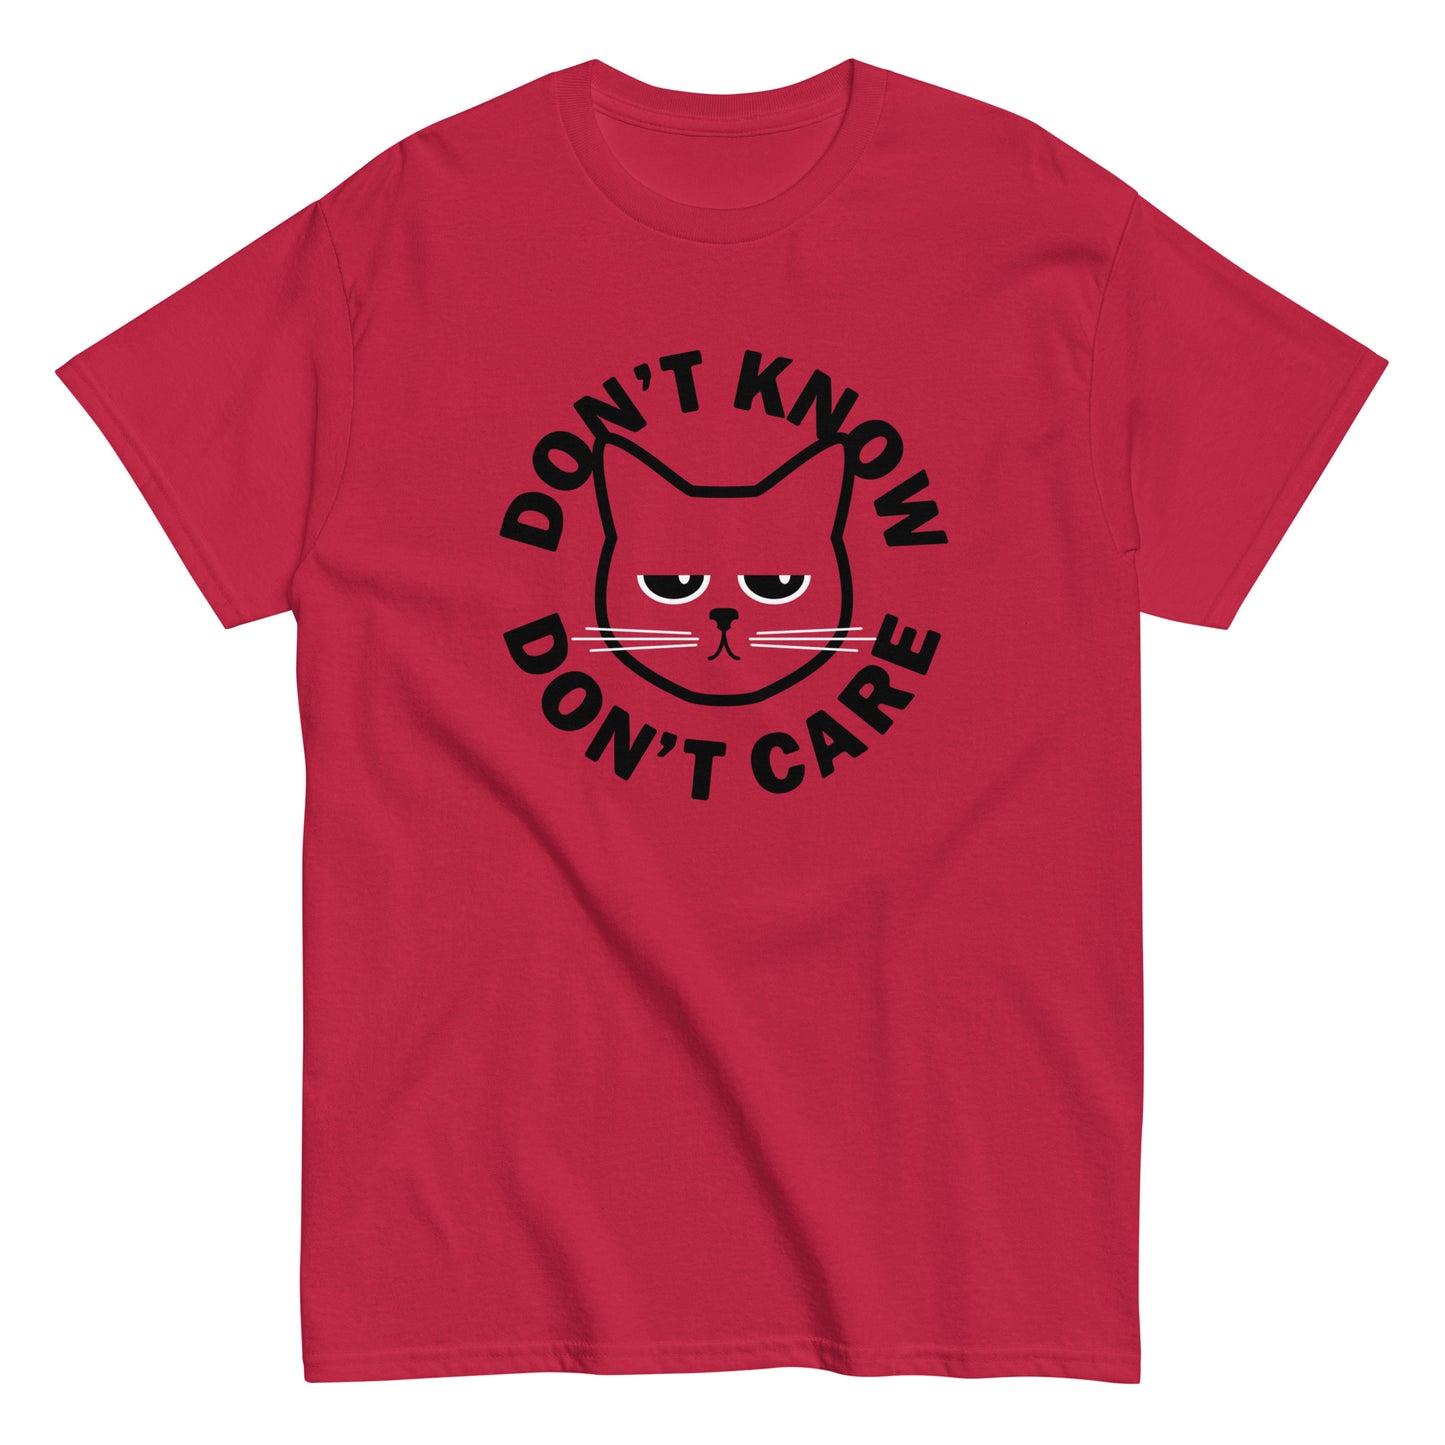 Don't Know Don't Care Men's Classic Tee